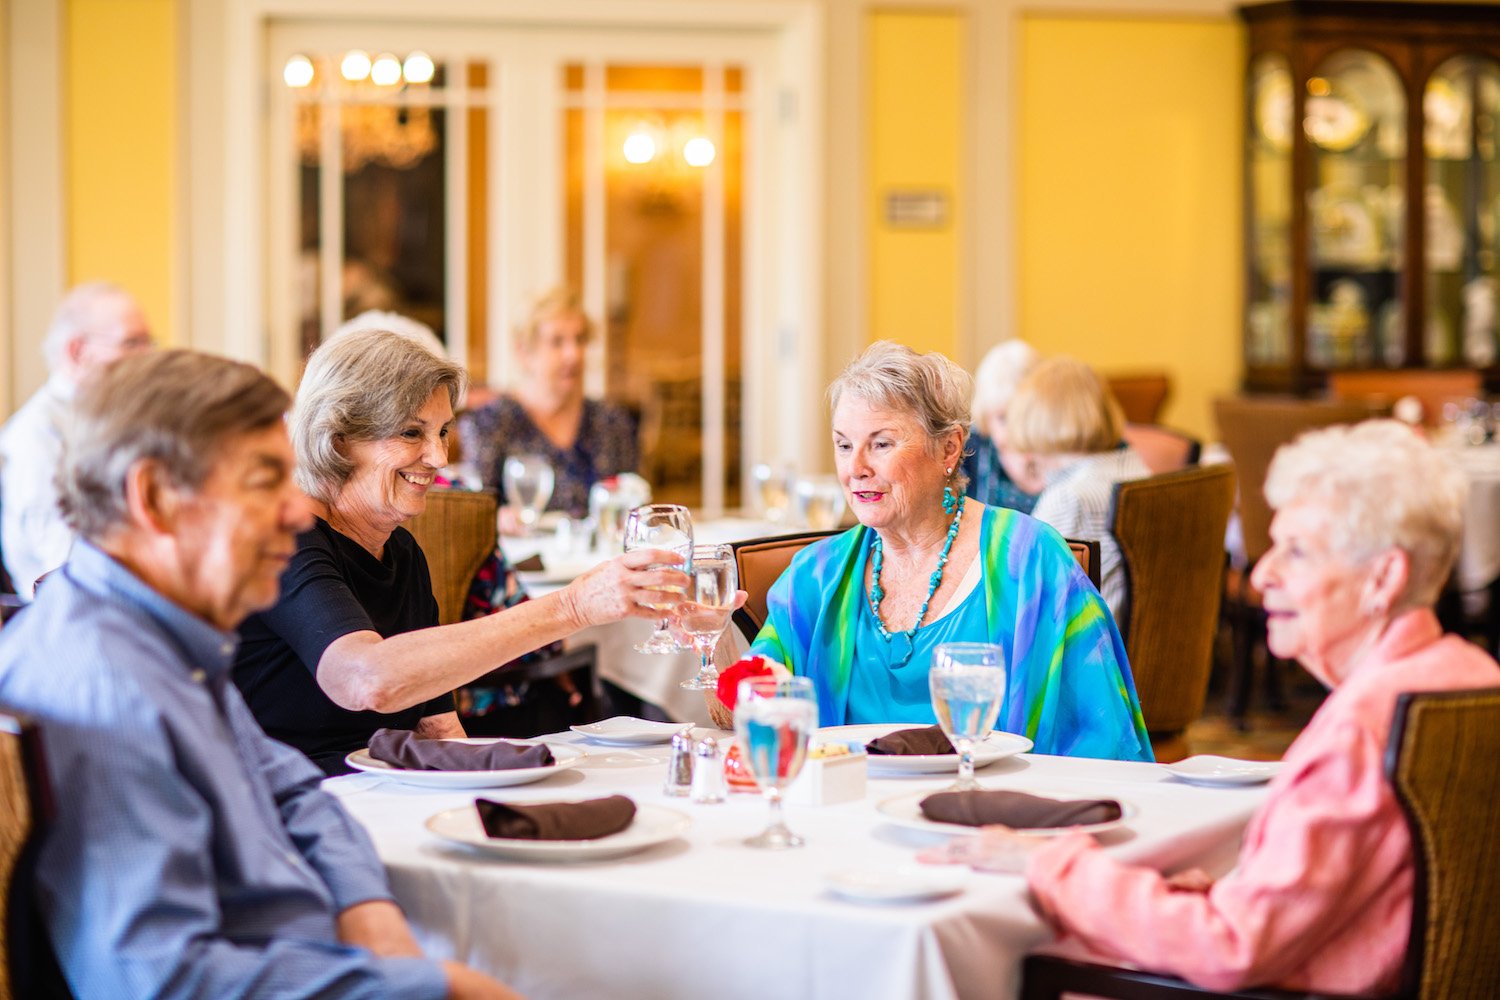 Senior women toasting with a drink at a dining table